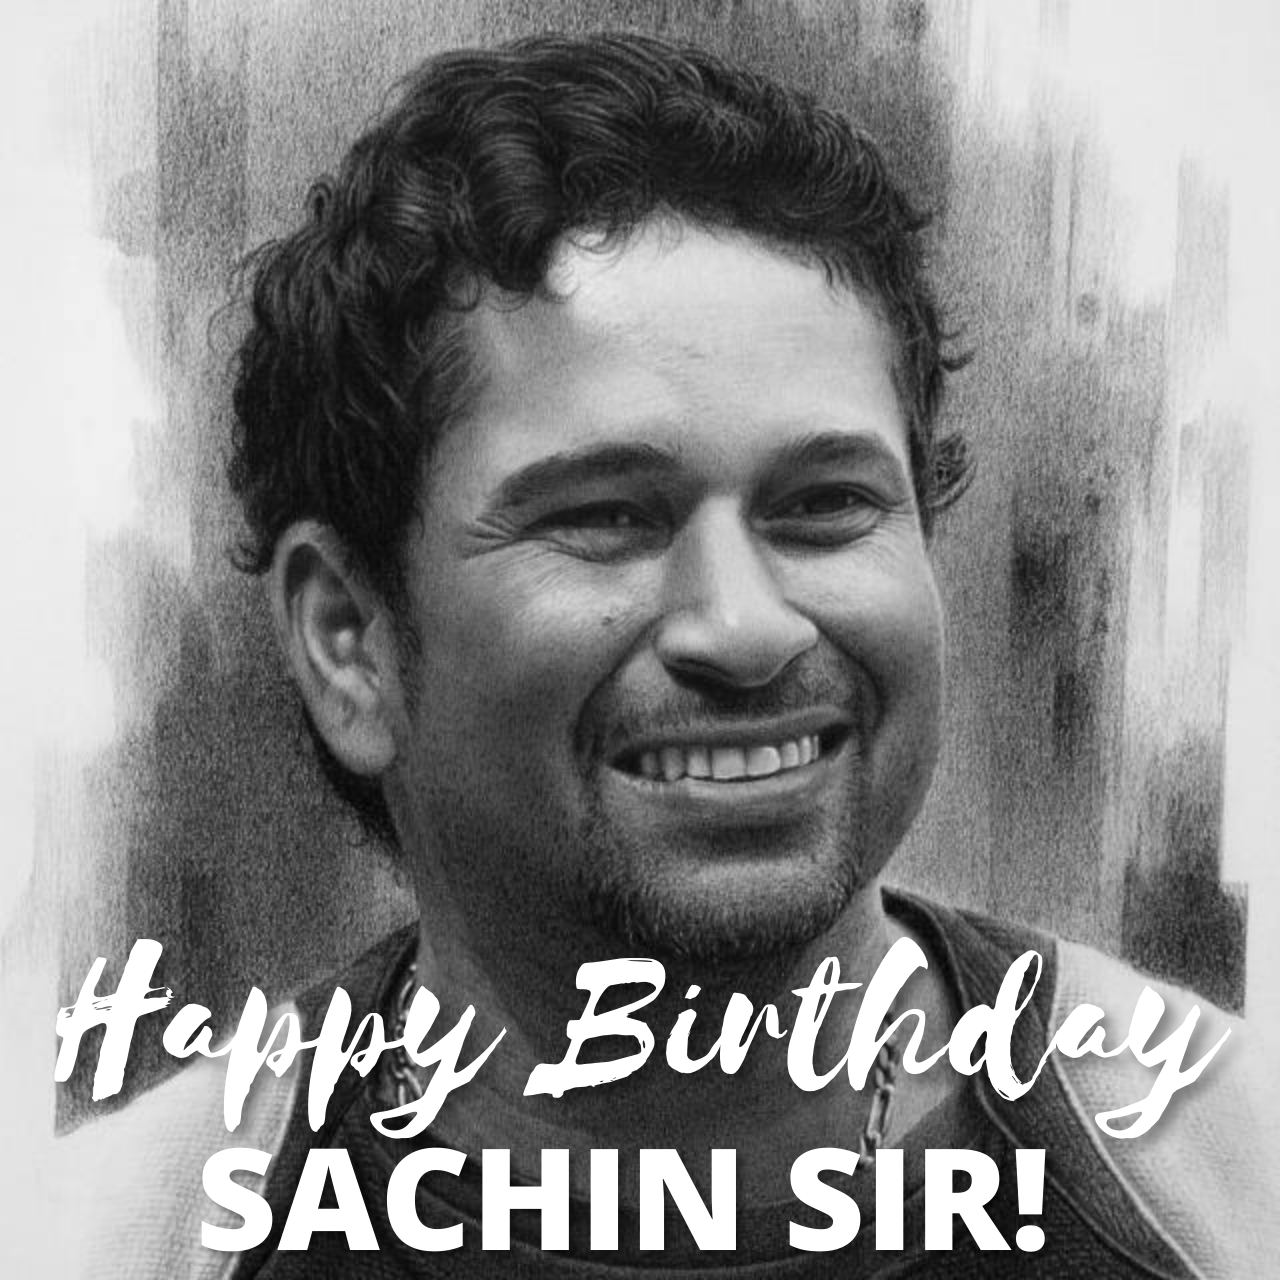 Happy Birthday Sachin Tendulkar: Top HD Photos (Images), Quotes, Status, Wishes to share with Master Blaster